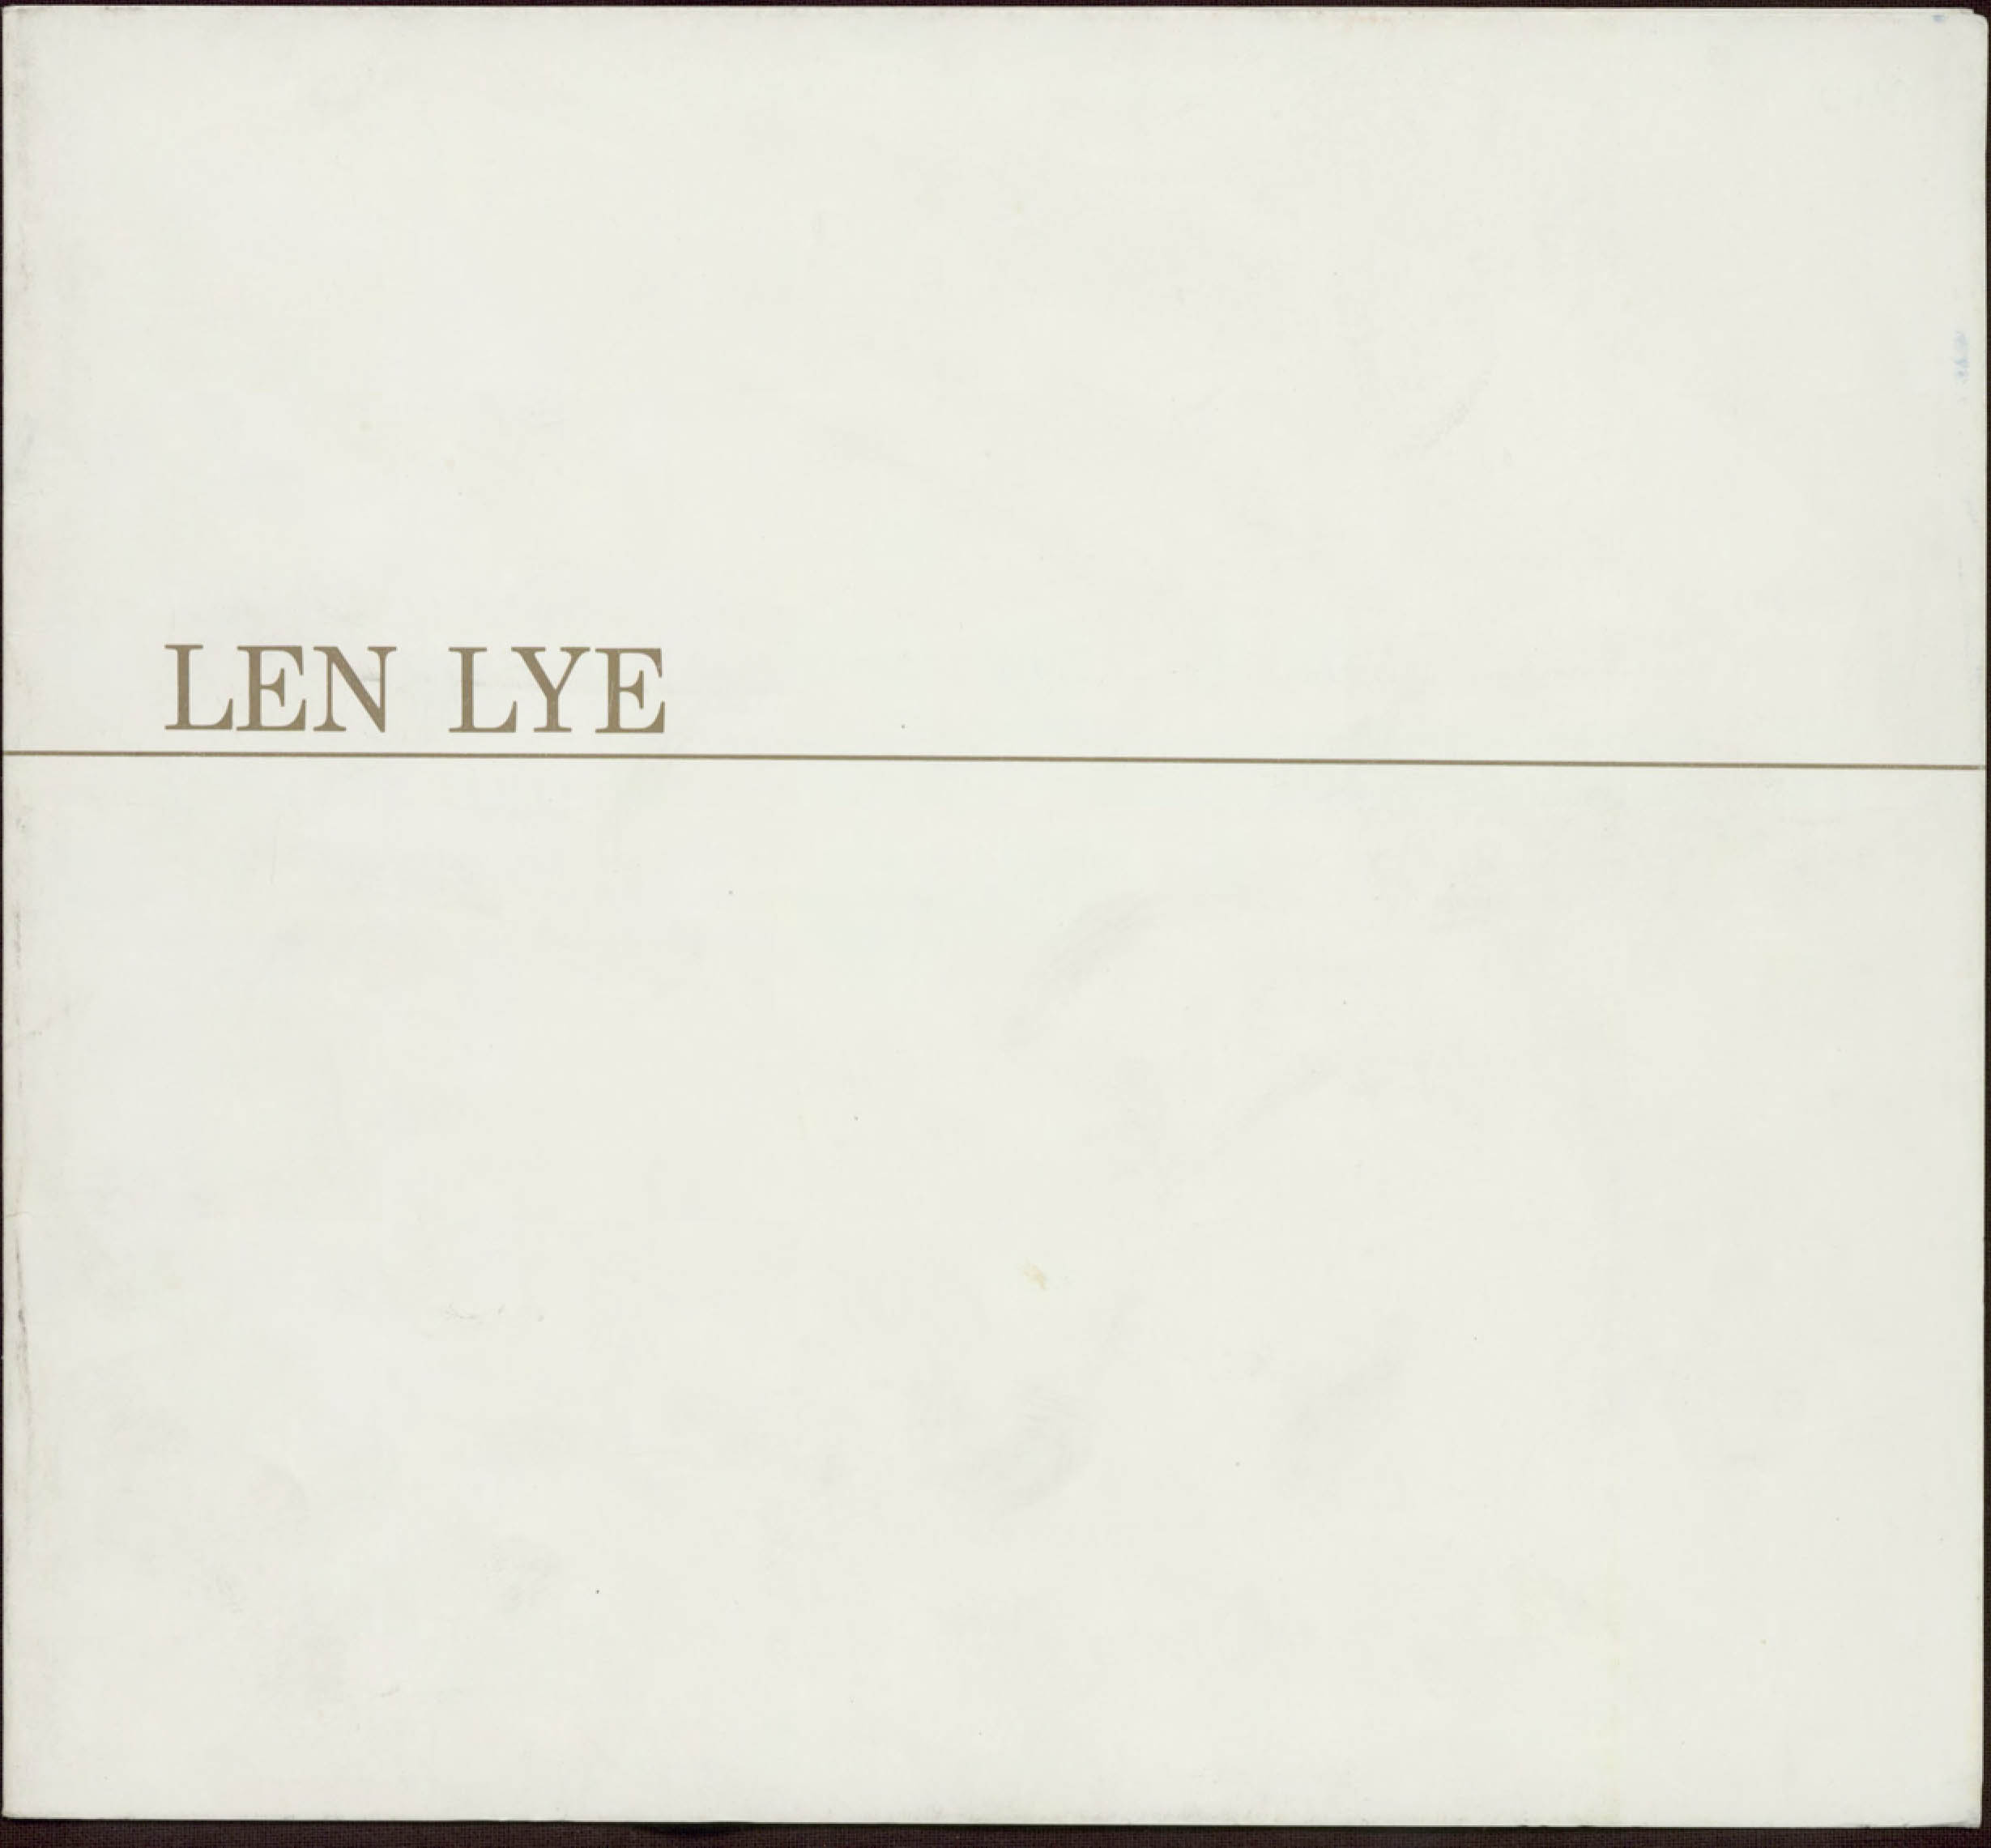 The cover of the catalogue for Len Lye's 1982 exhibition at the Govett-Brewster Art Gallery, featuring gold text stating the artist's name, and an underline, on a white background.